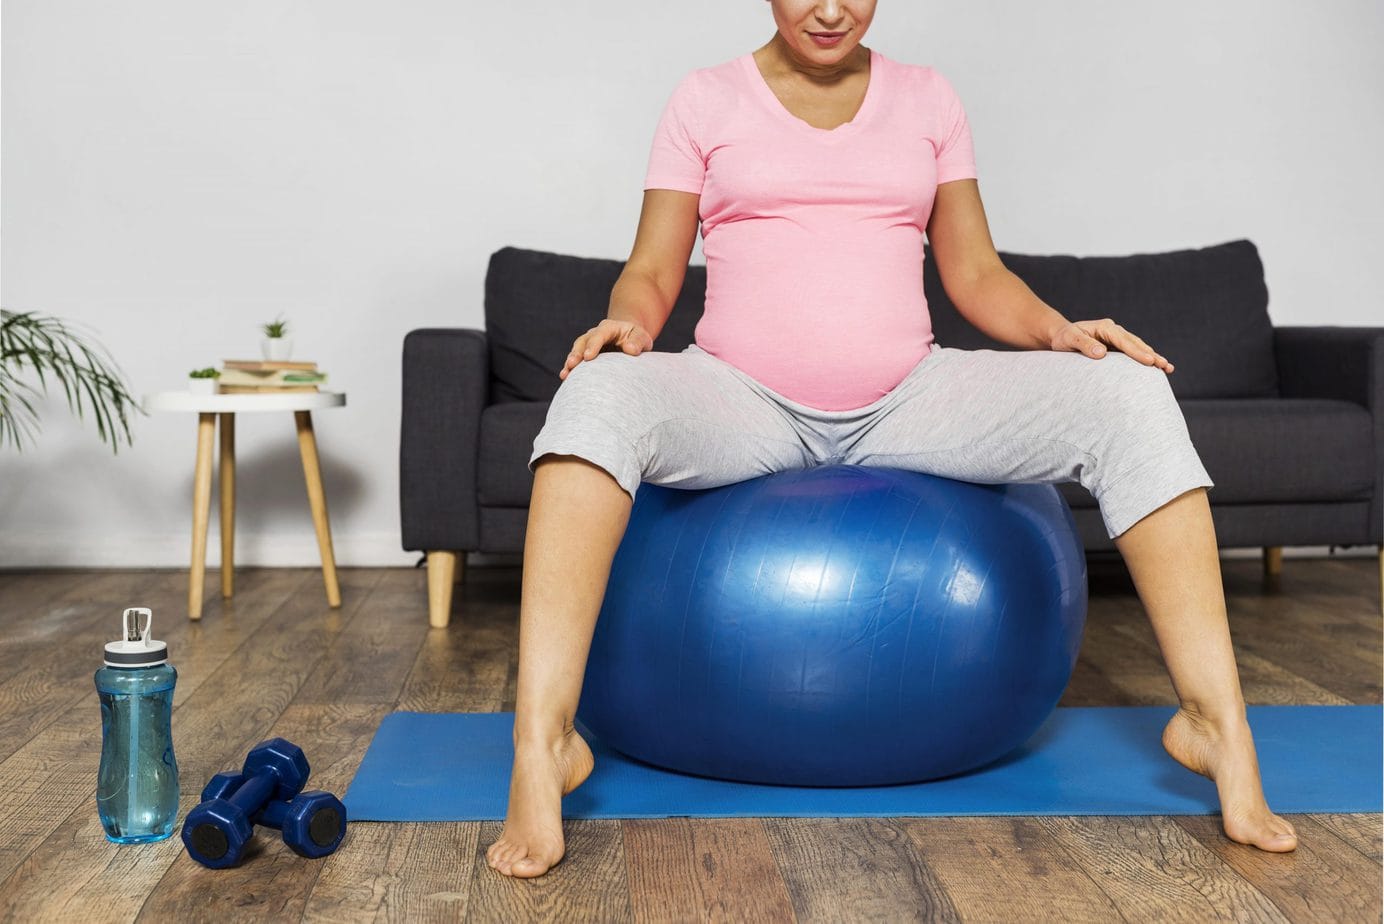 Fitness accessories perfect for pregnant women